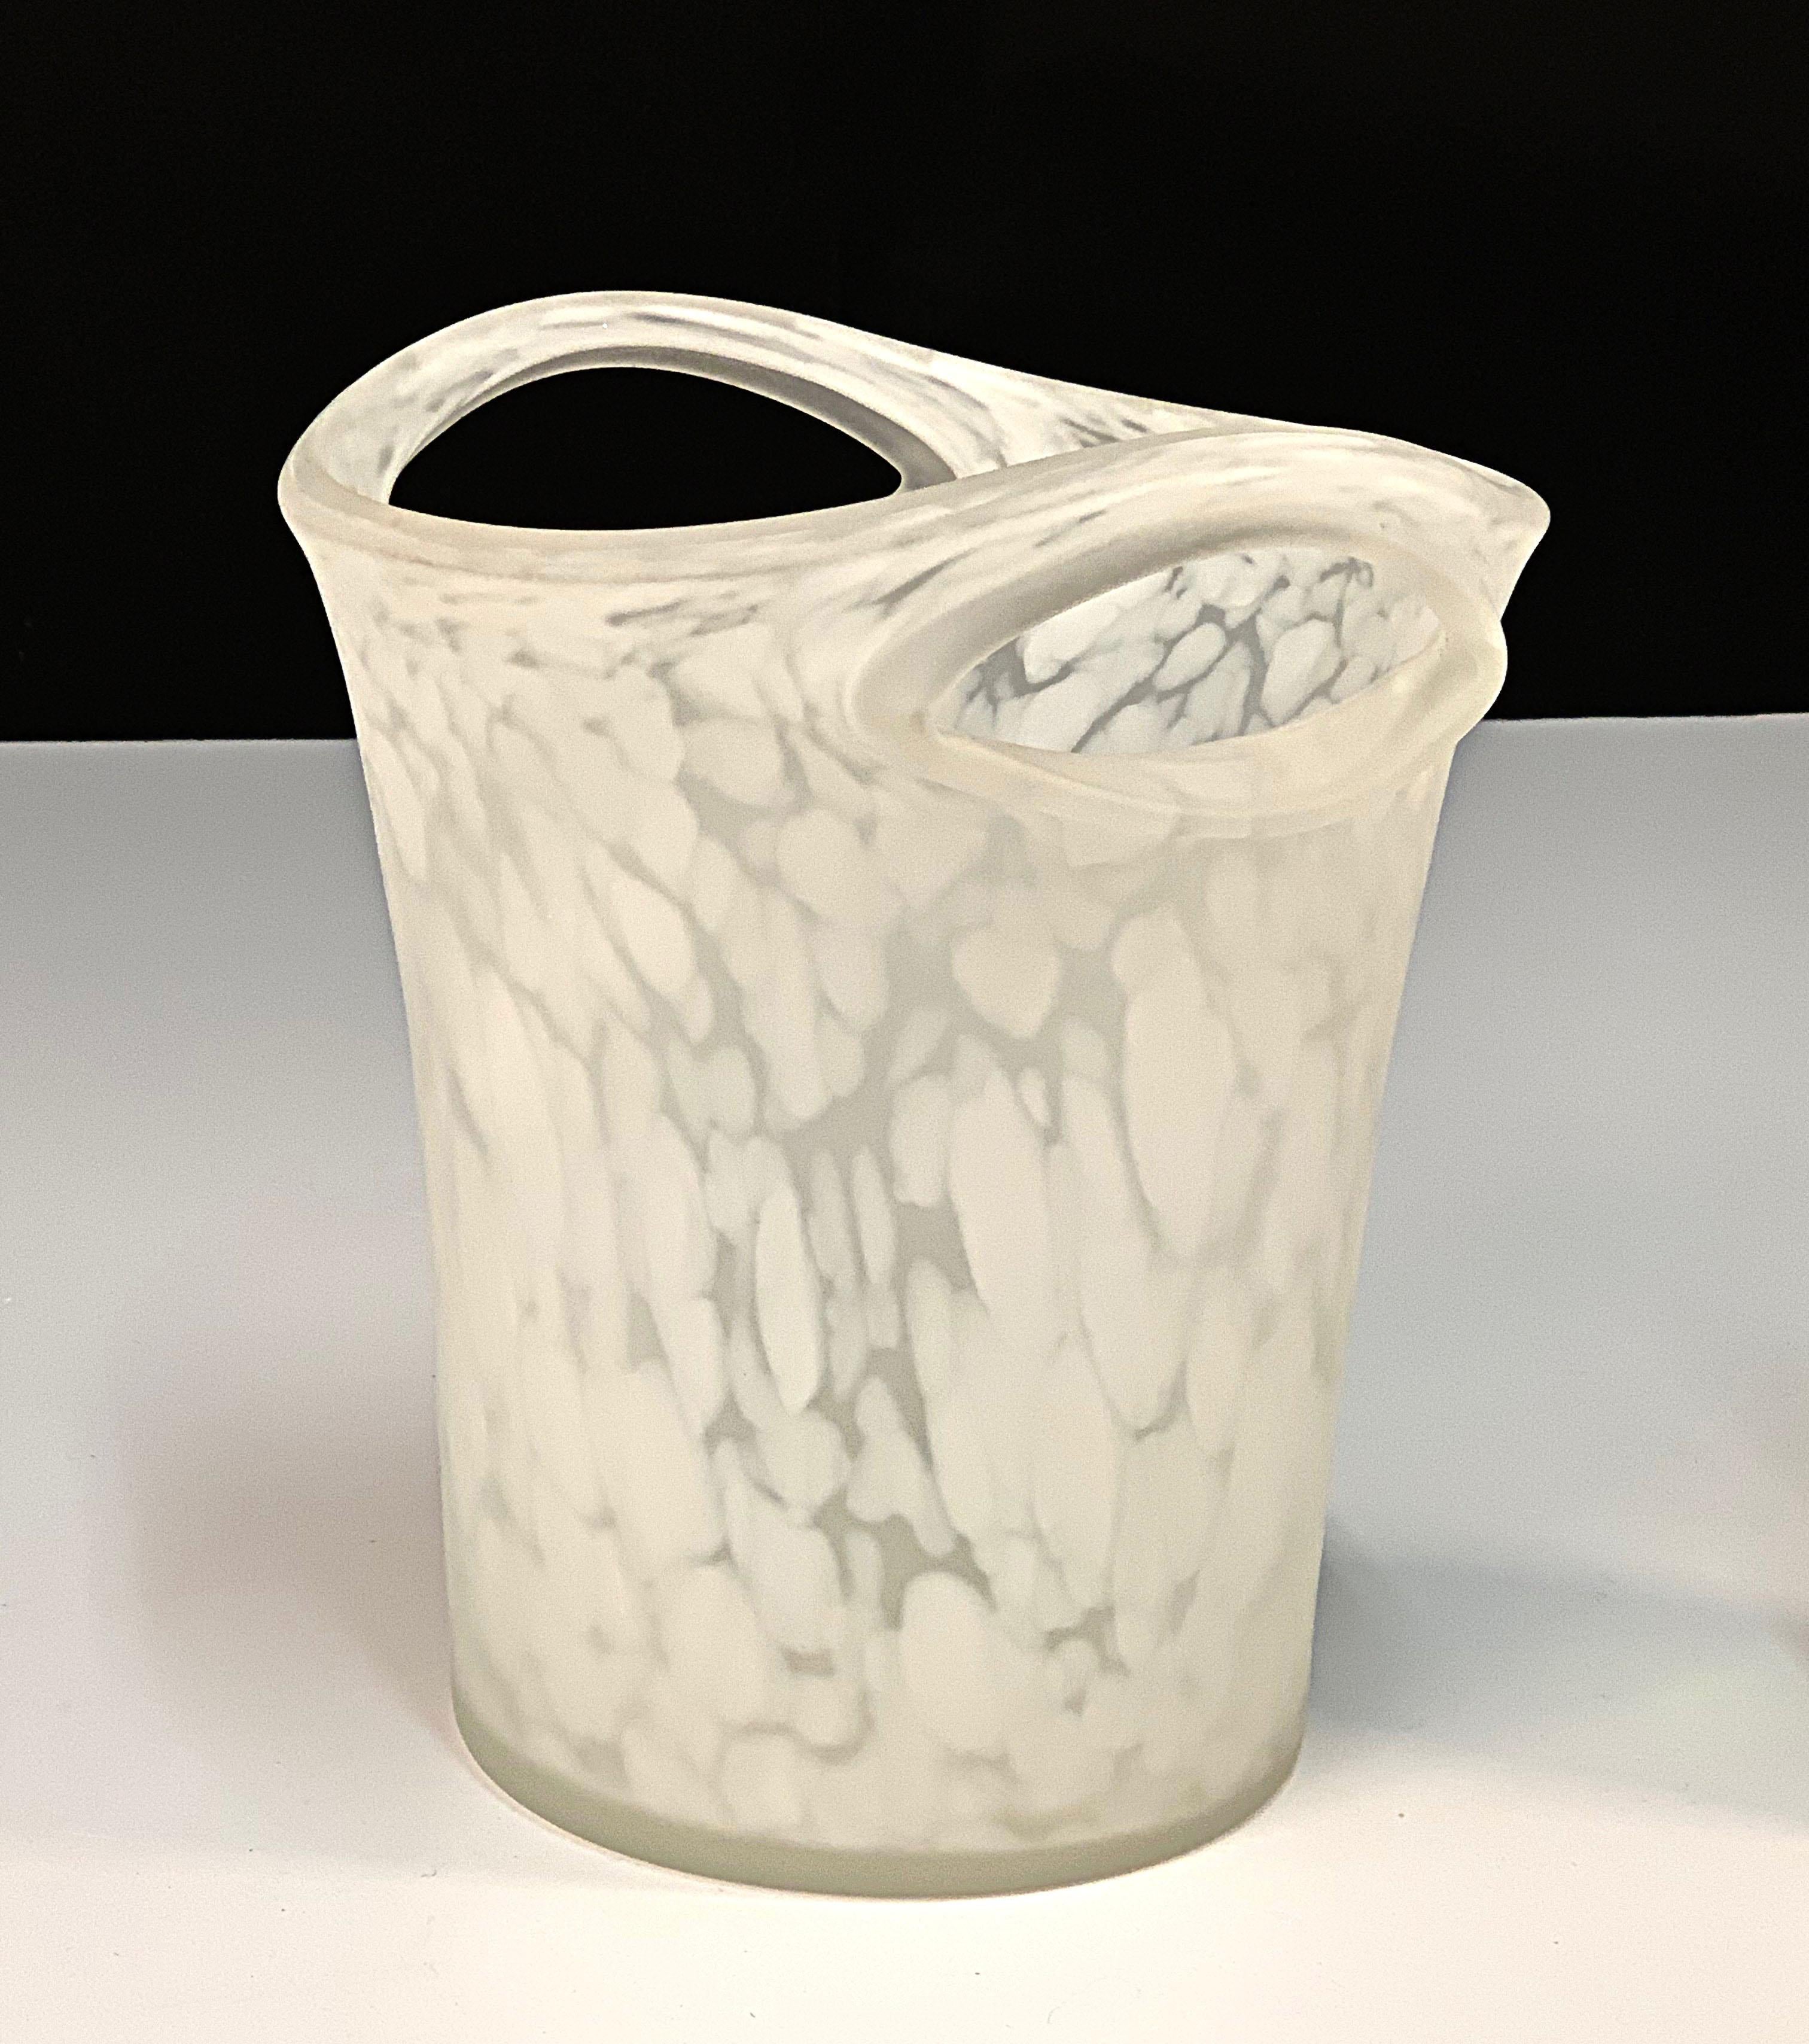 Exceptional midcentury Italian glass champagne or wine cooler ice bucket. 

This item is made of mouth-blown milky glass and it was produced by the manufacturer Empoli in Italy during the 1960s.

An amazing production with pierced glass handles,